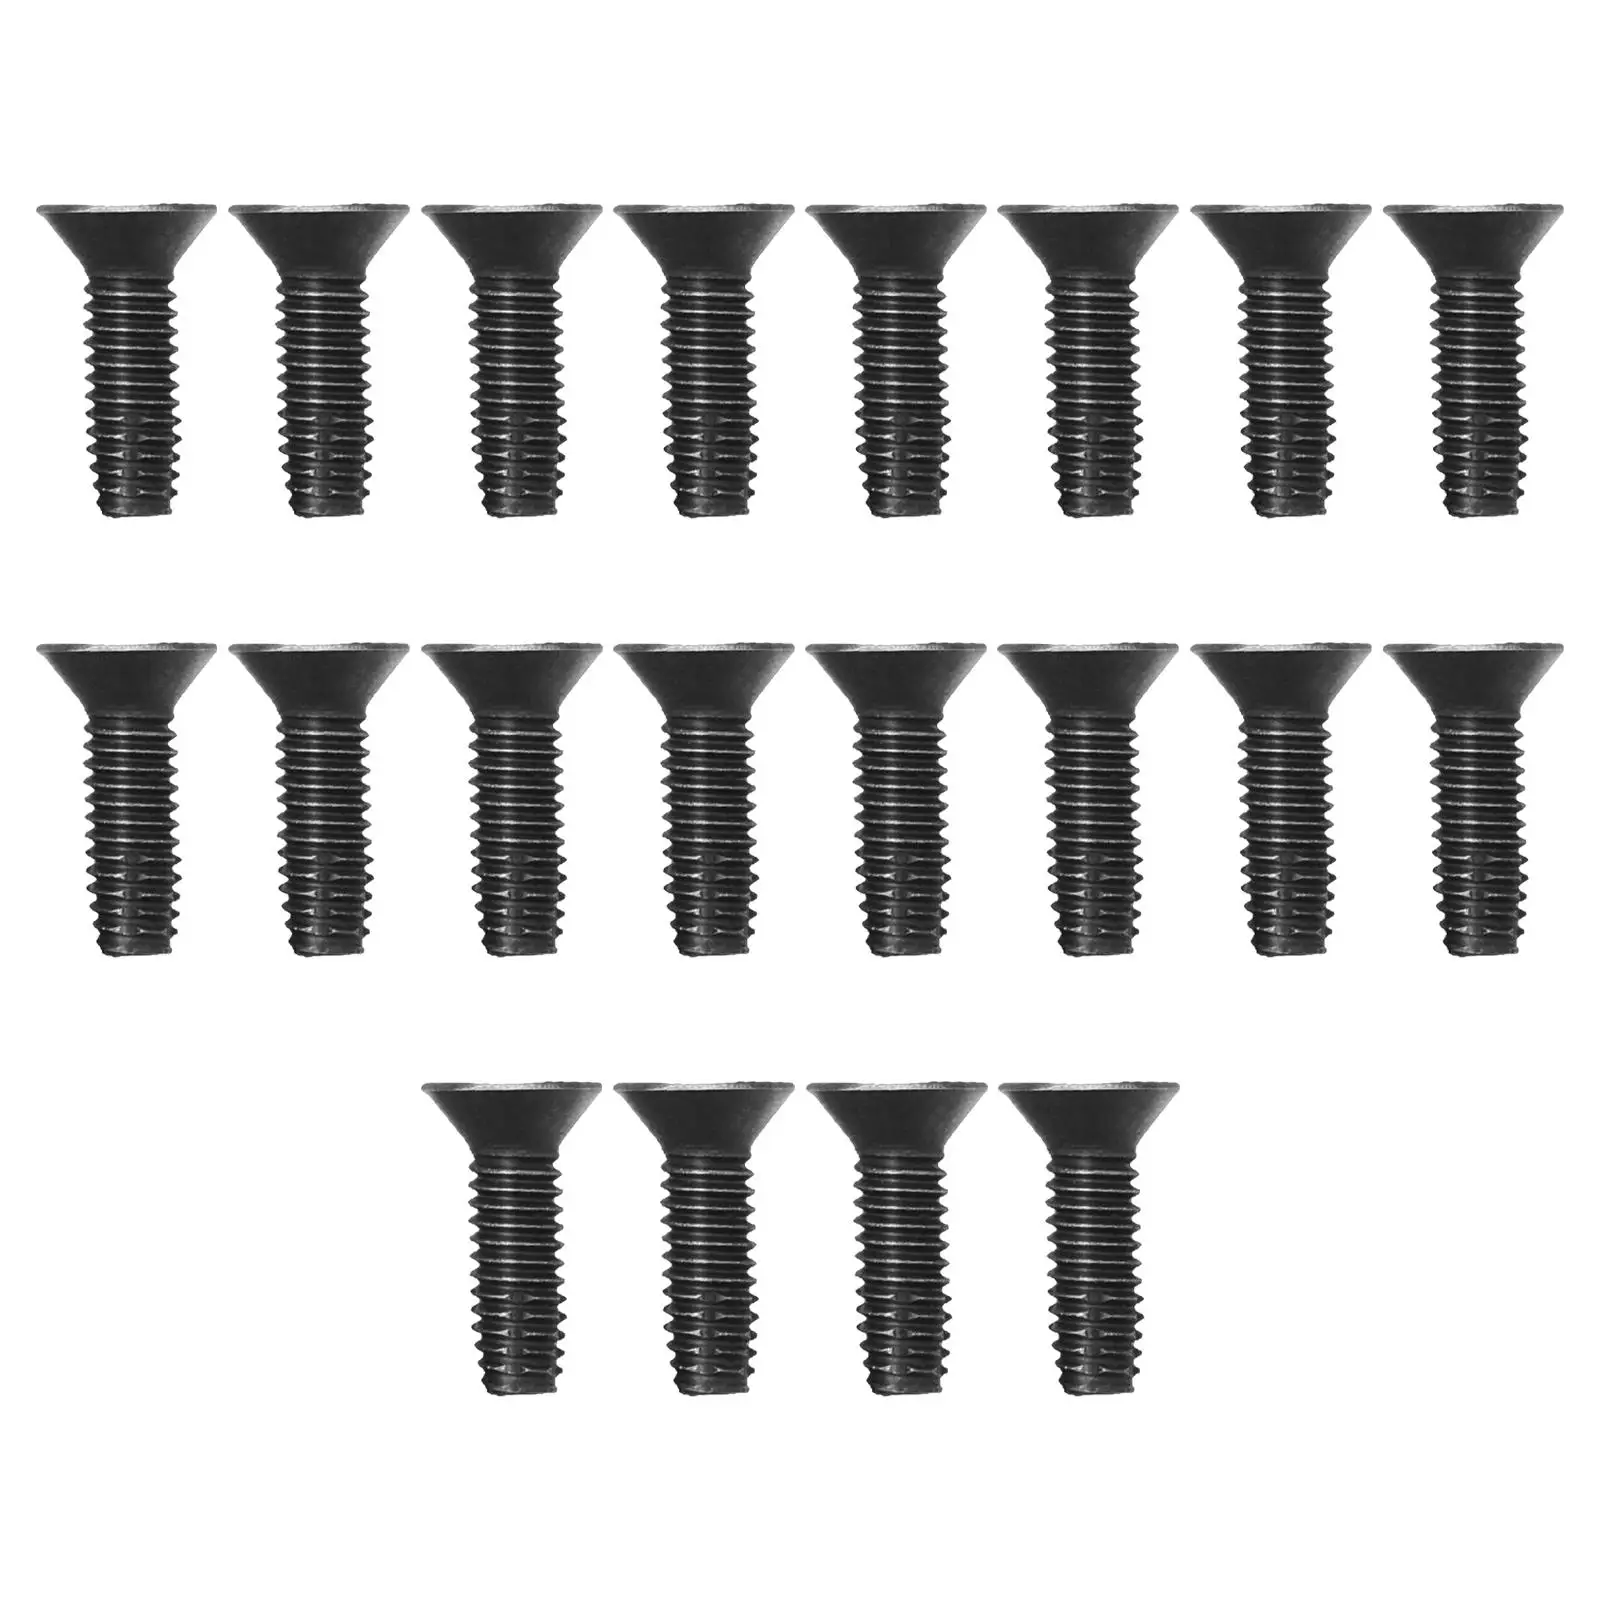 

20 Pieces Hinge Screws Bolts Iron Accessories Auto Parts Tailgate Screws Fits for Wranglers Yj TJ Car Doors Windshield